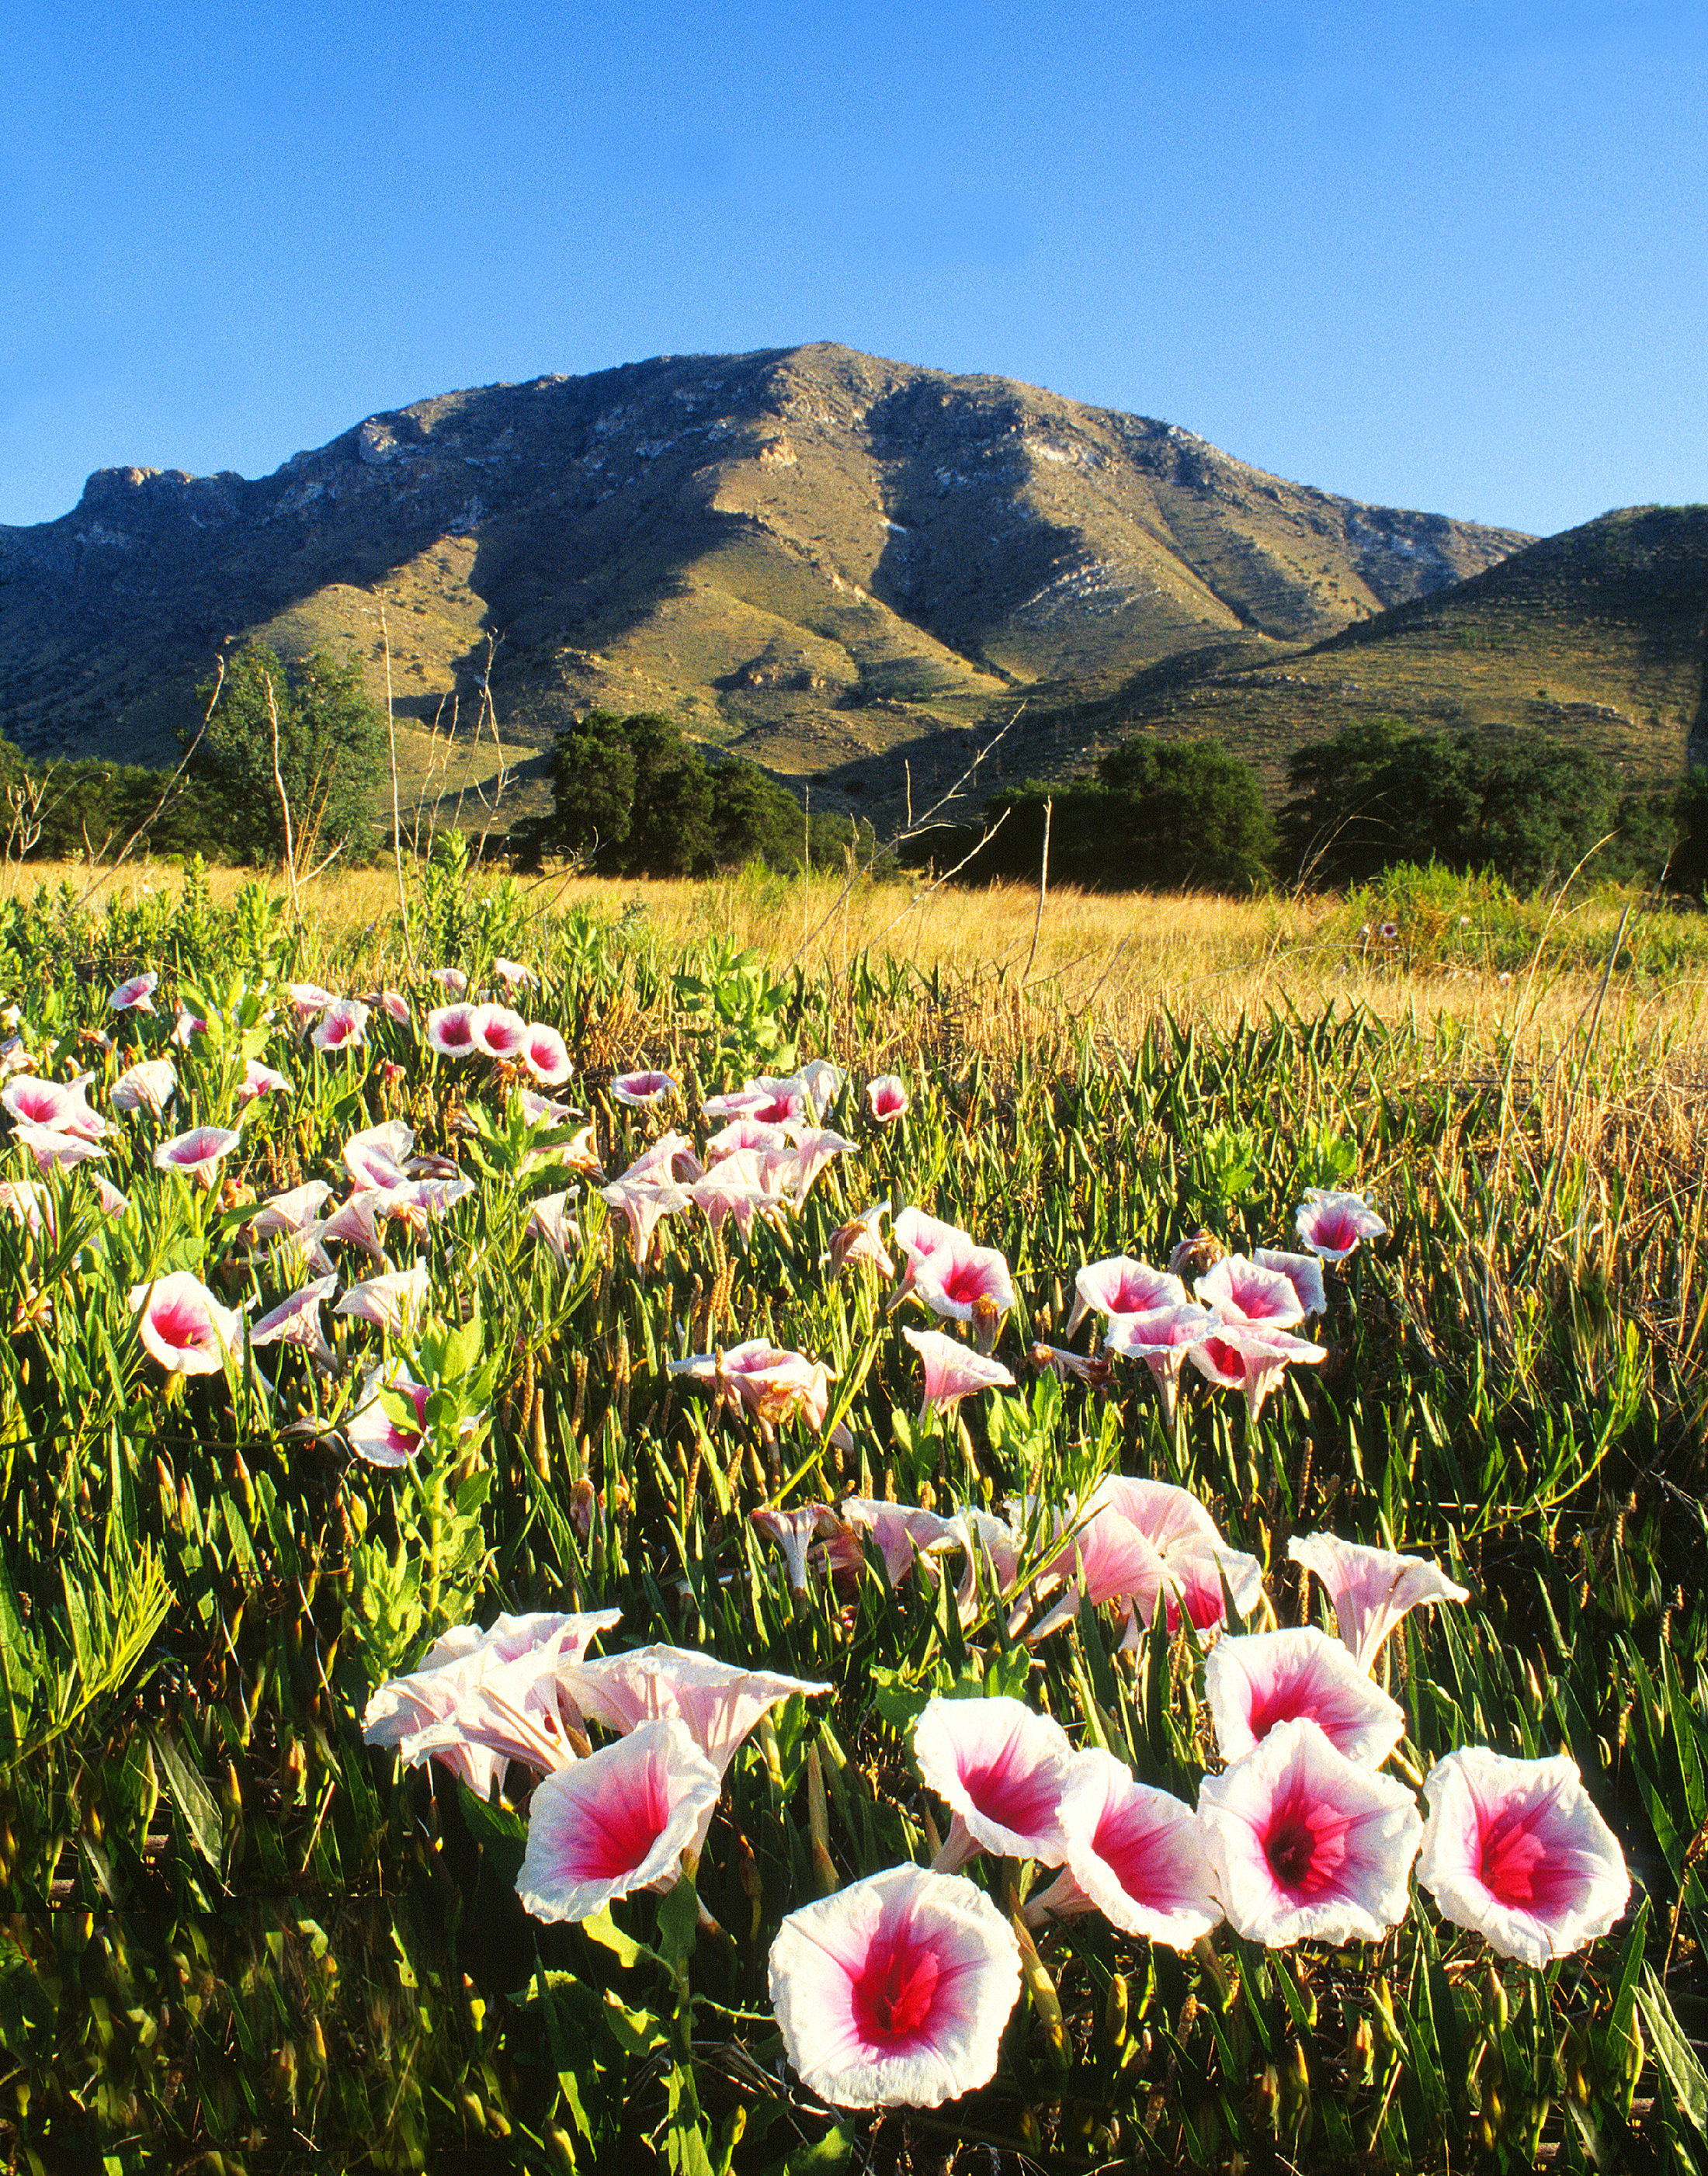 Pink morning glories with mountain and grasslands